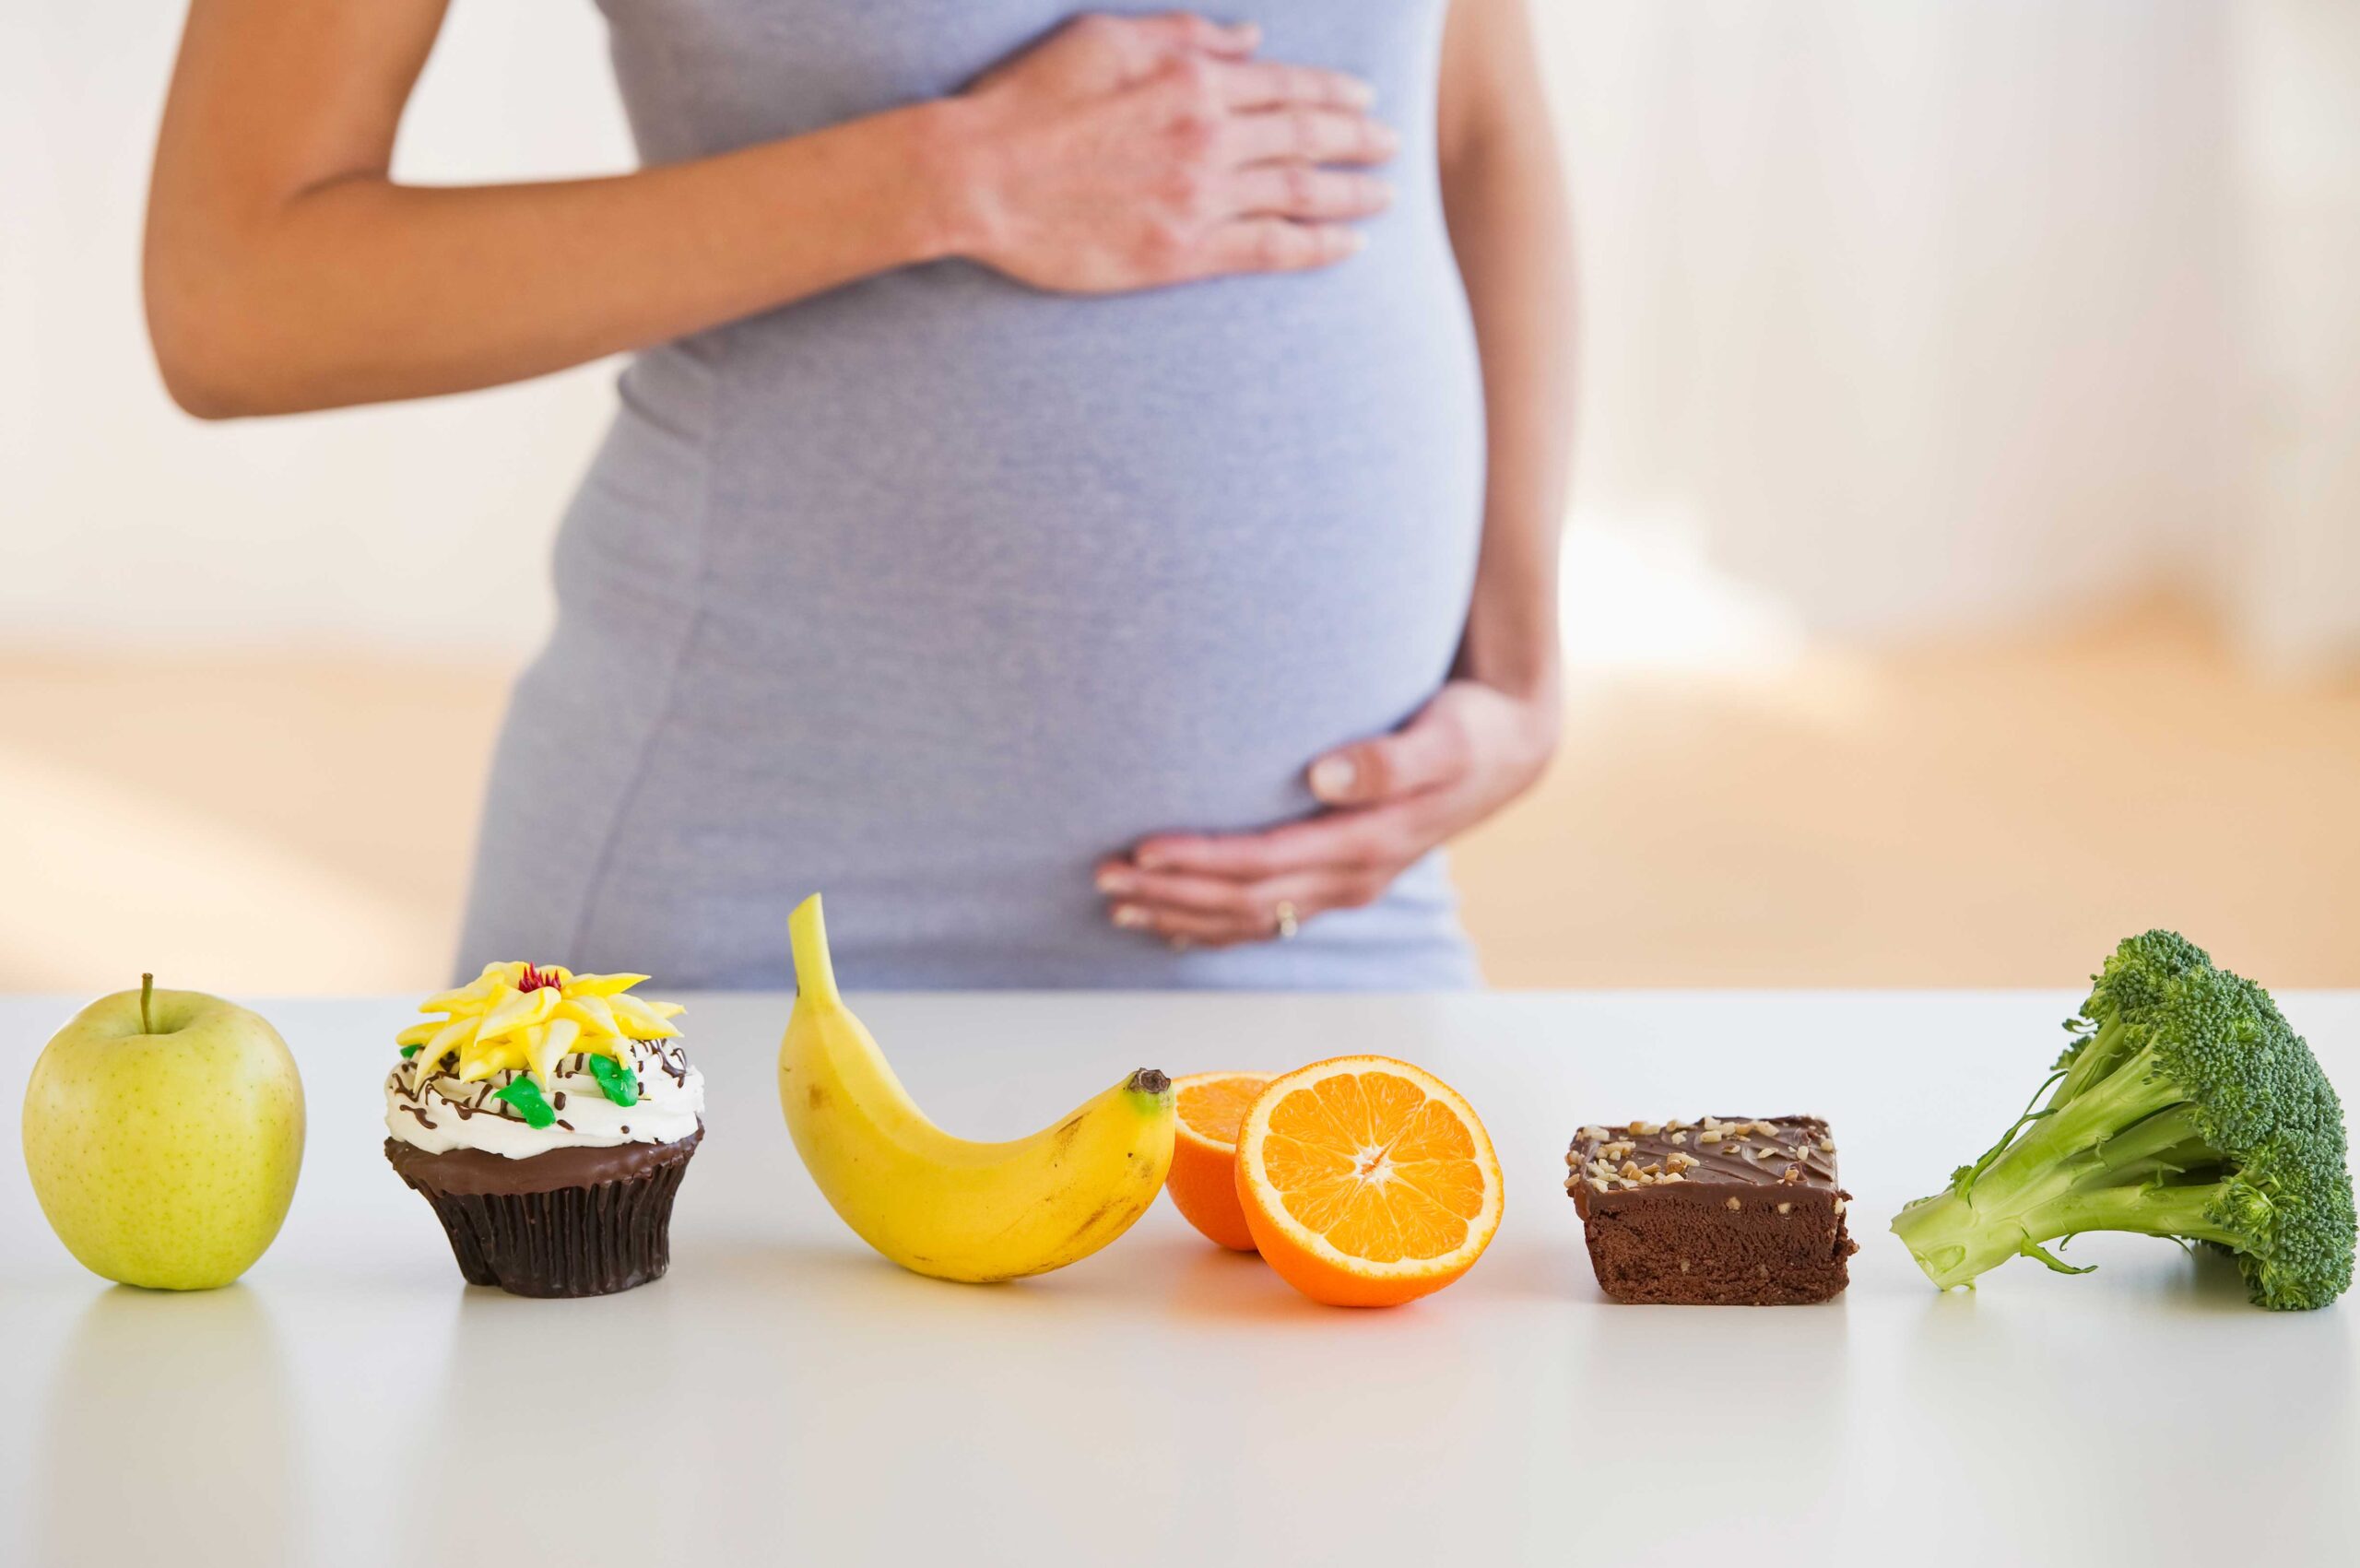 Foods for pregnancy